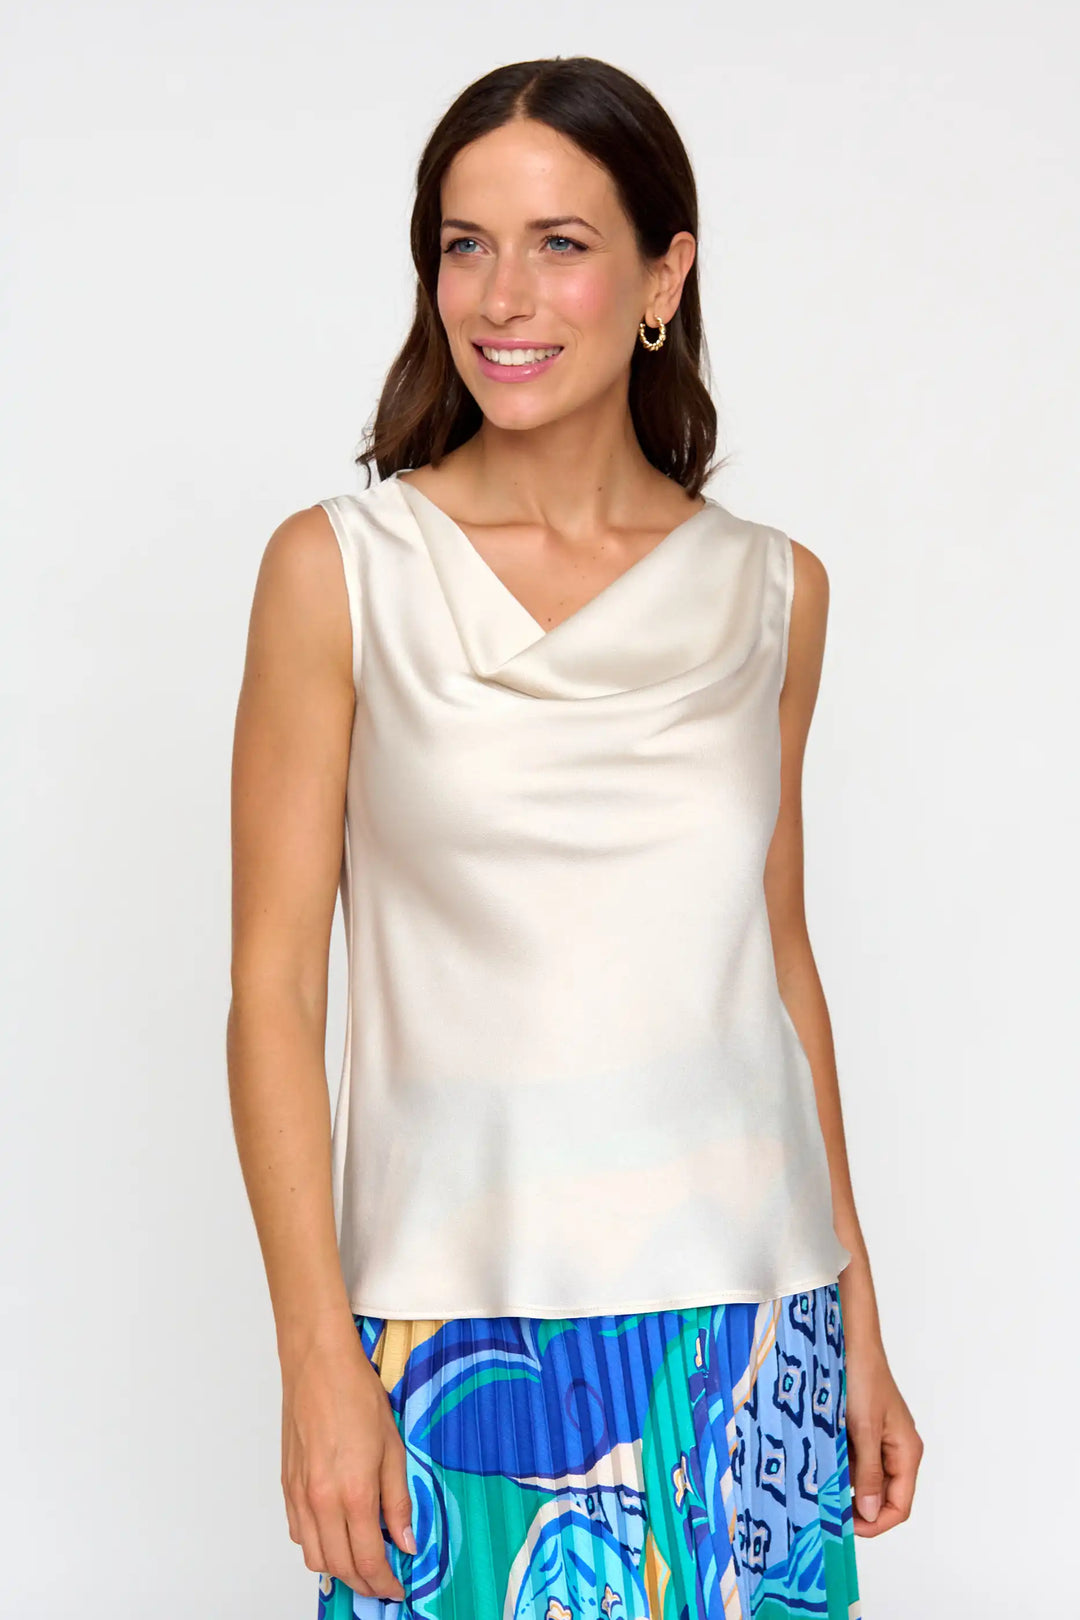 Smiling model in the 'Jerez' style ivory blouse with a soft cowl neckline, sleeveless cut, paired with a vibrant, multi-coloured skirt.